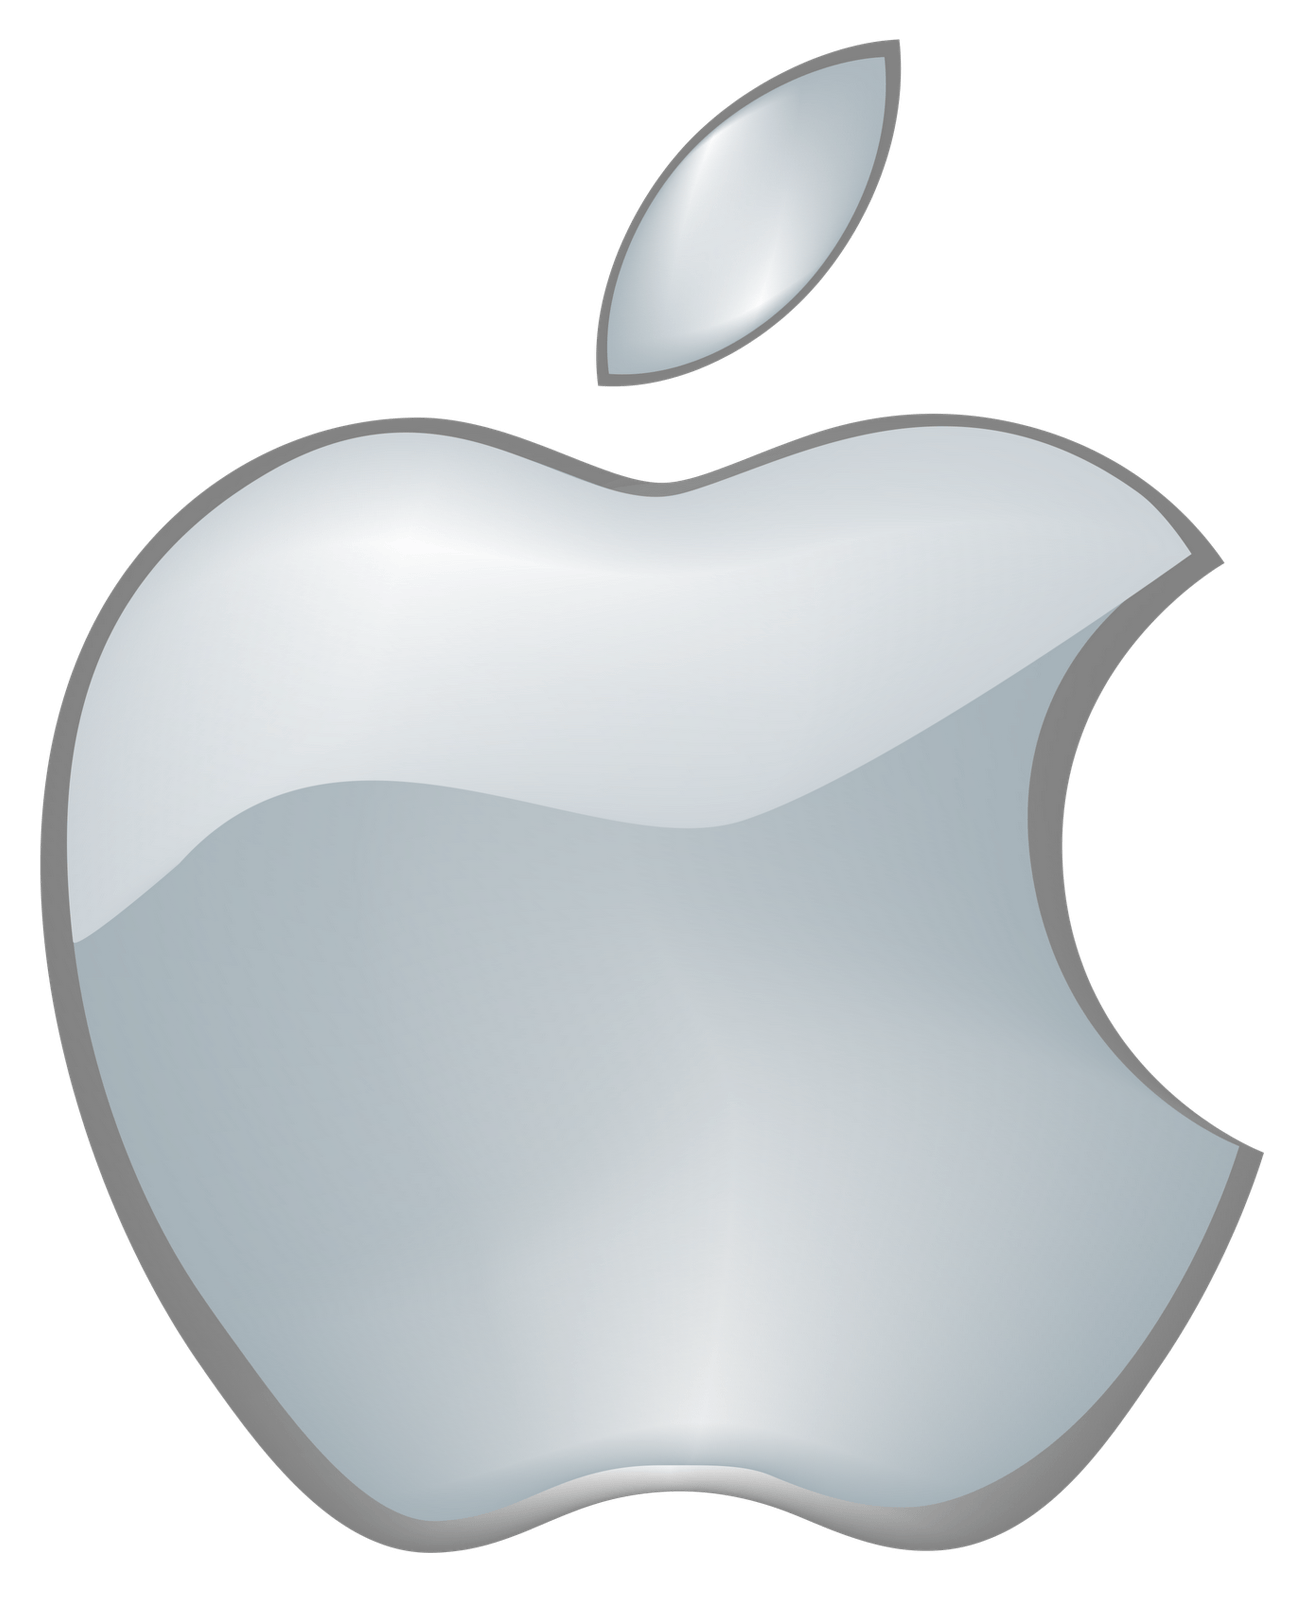 B in Apple Logo - HITS Daily Double : Rumor Mill APPLE: VALUE HITS $800B